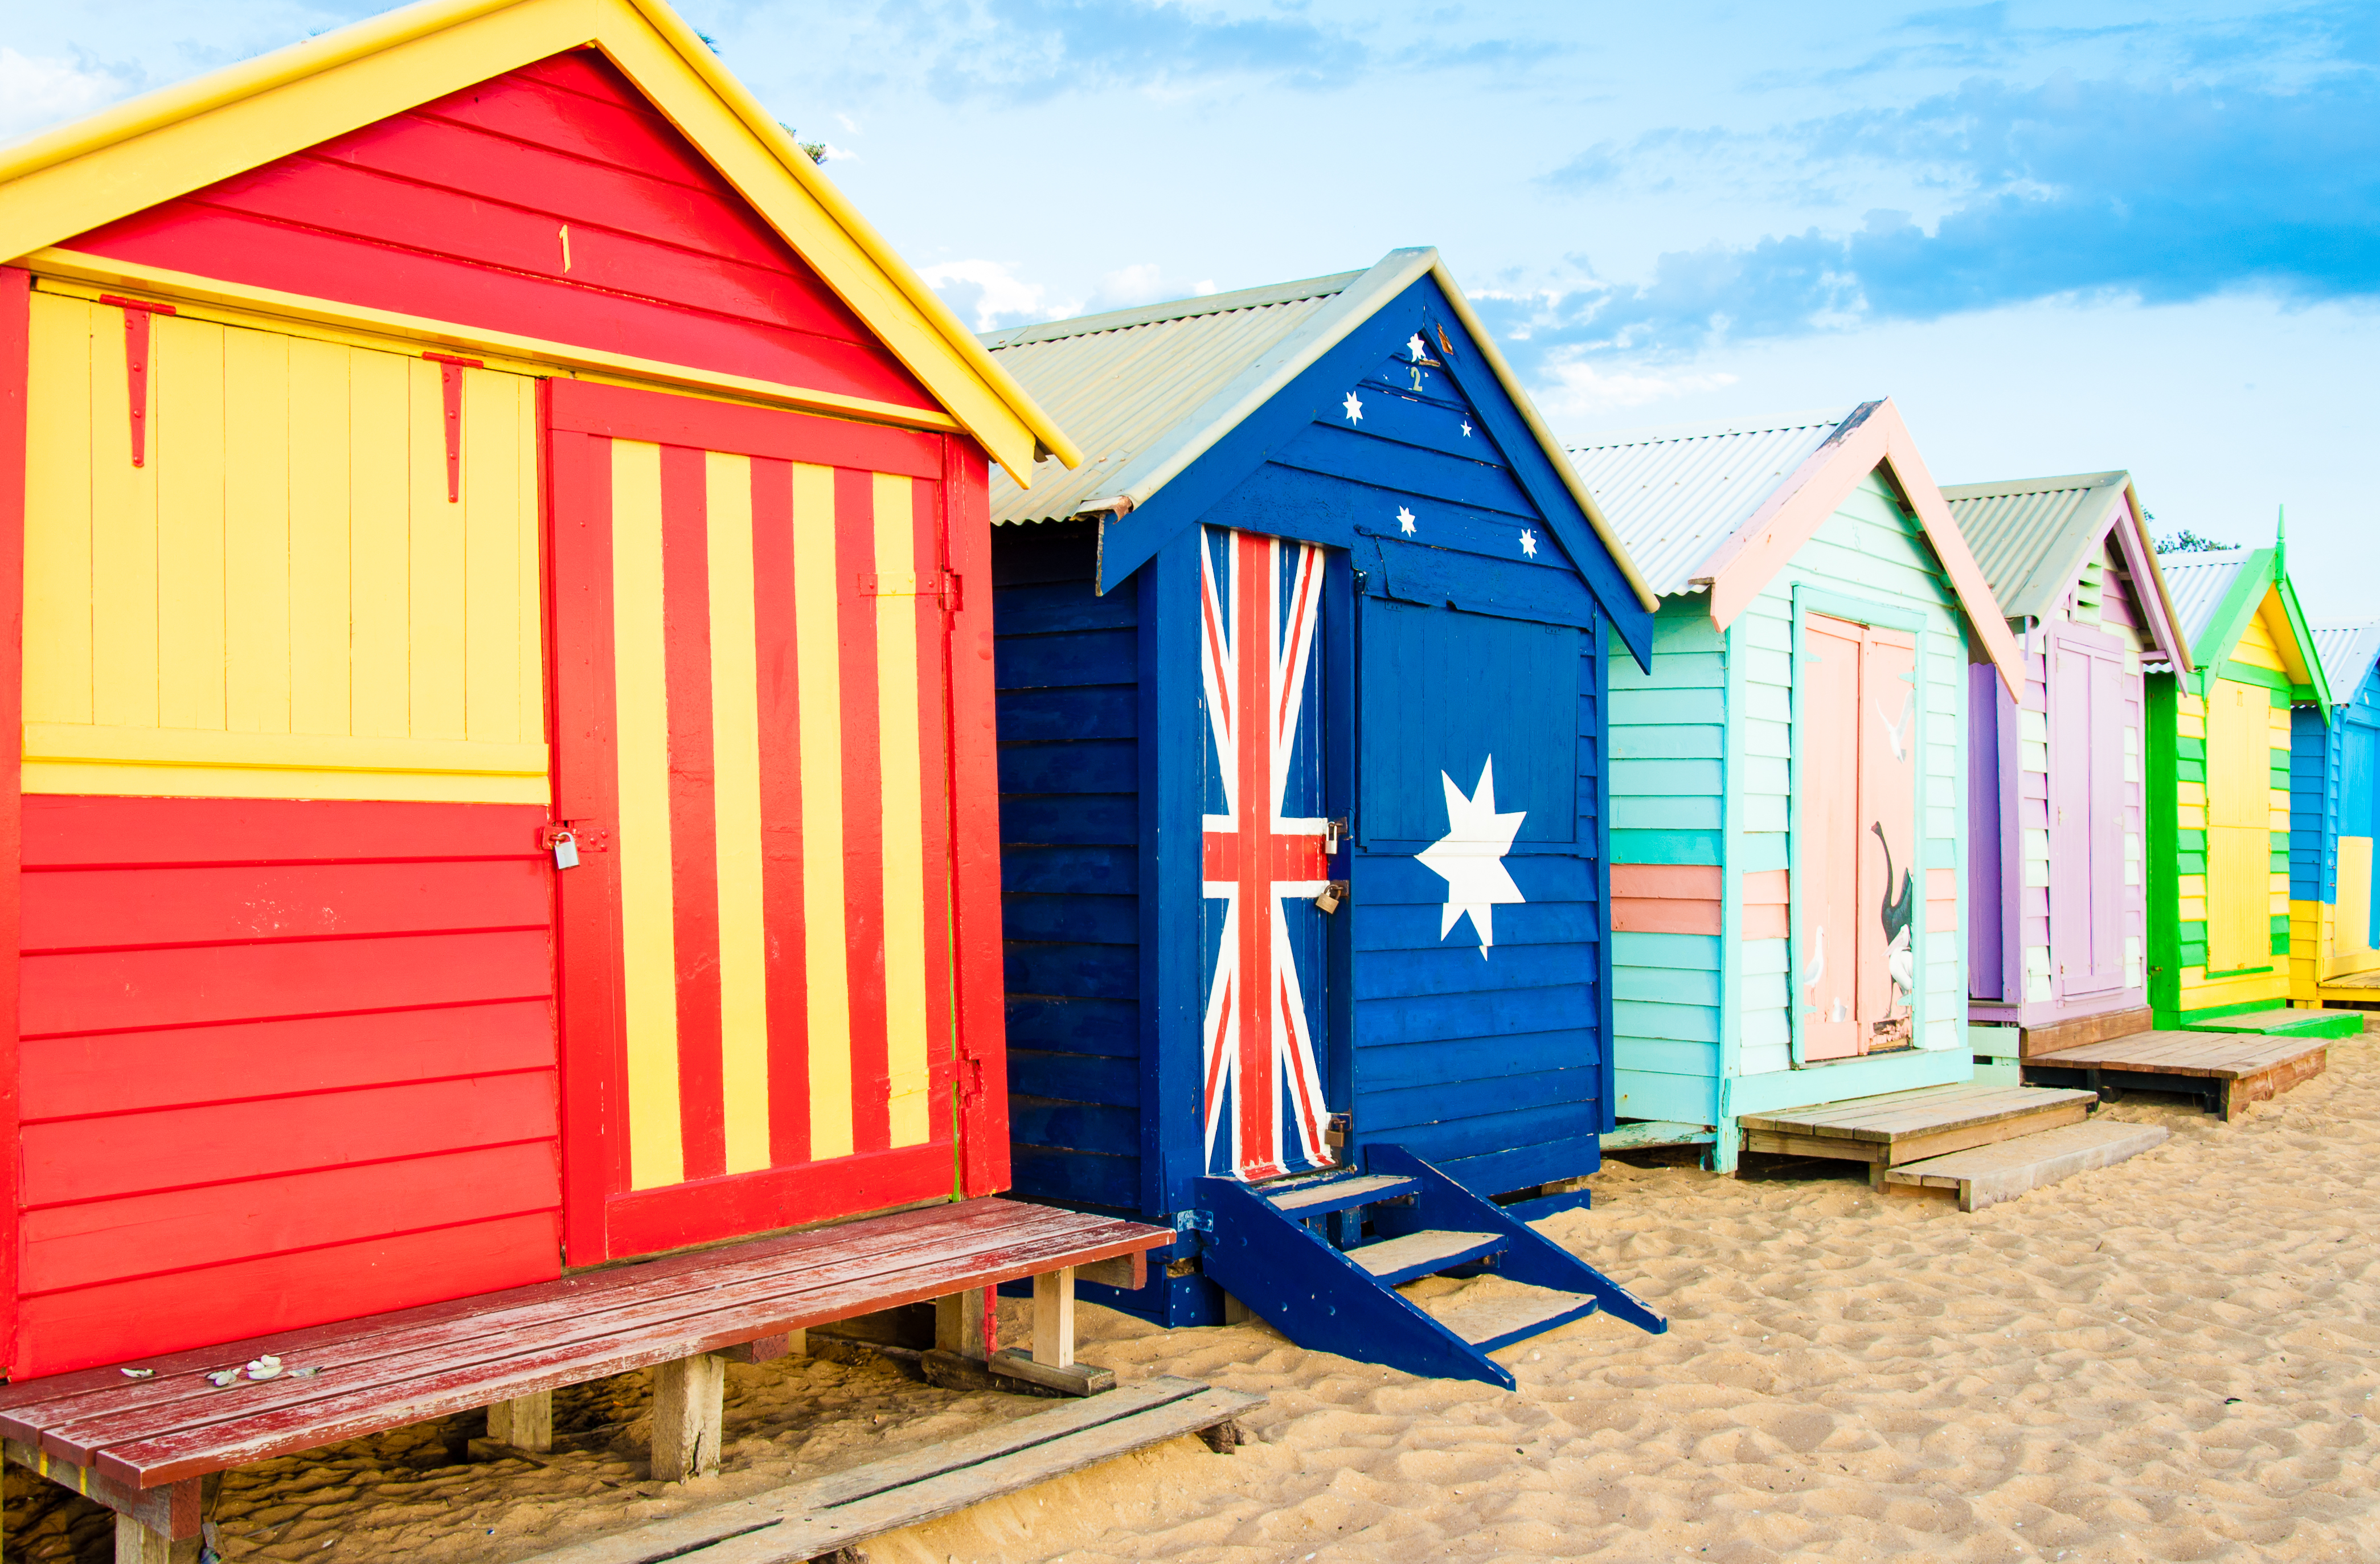 Melbourne Australia - February 21 2015: Brighton bathing boxes with classic Victorian architectural features are a popular Bayside icon and cultural asset at Brighton Beach Melbourne Australia